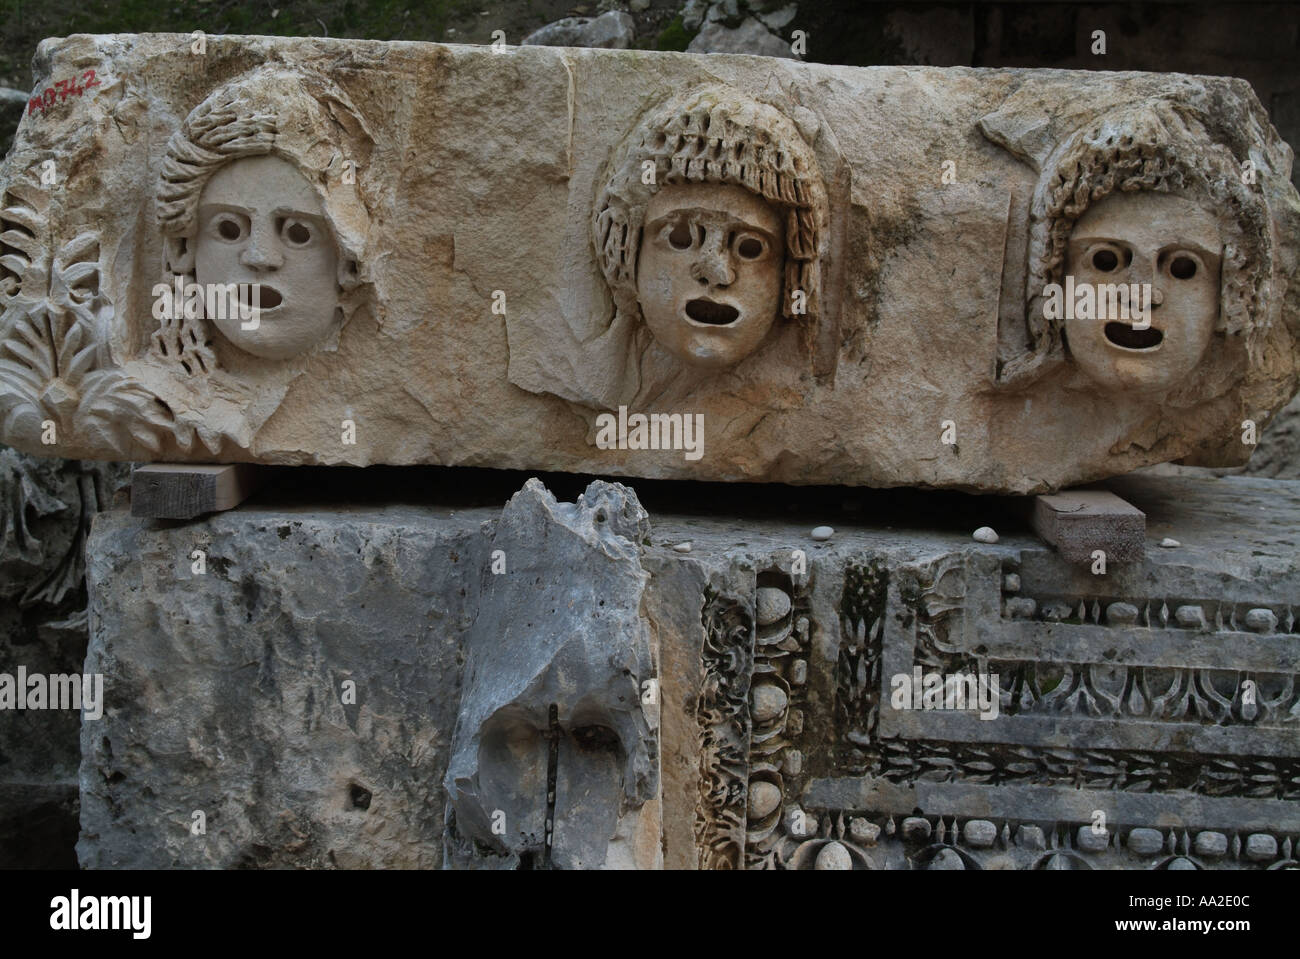 Frieze of stone masks from ancient theatre, Myra. Stock Photo